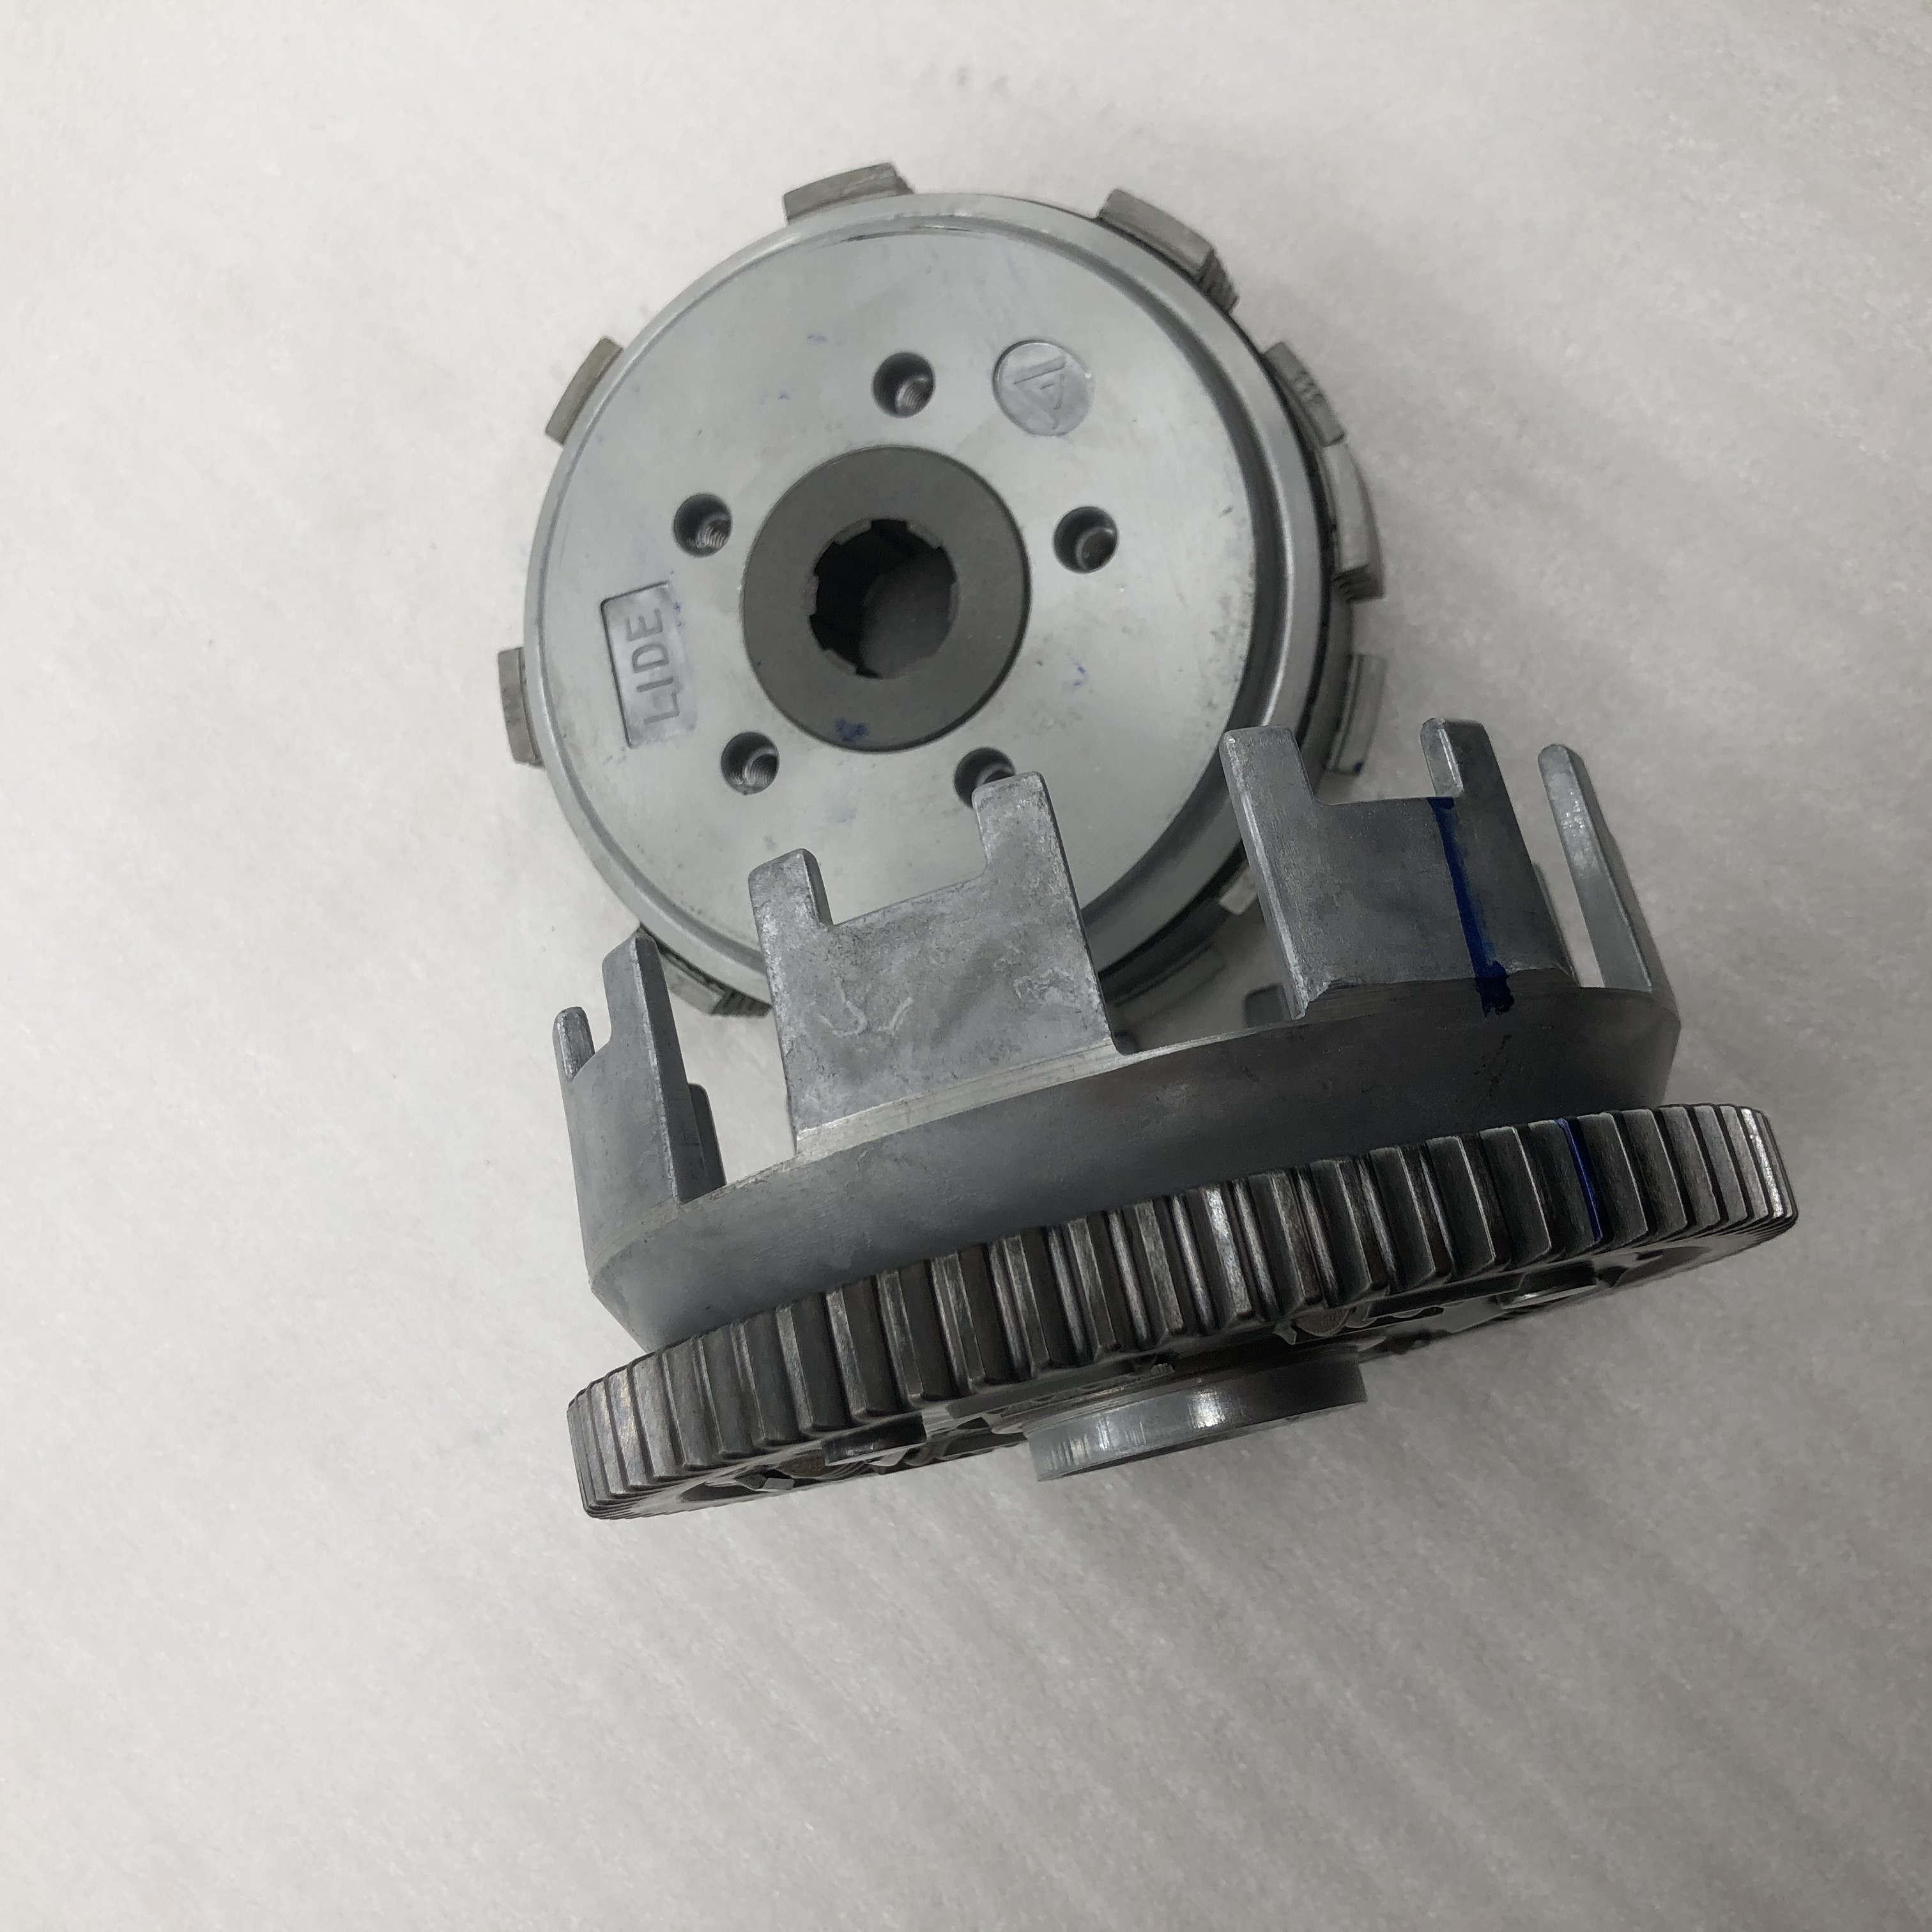 Dayang Tricycle Factory original spare parts Lifan 200cc water-cooled engine parts clutch assembly